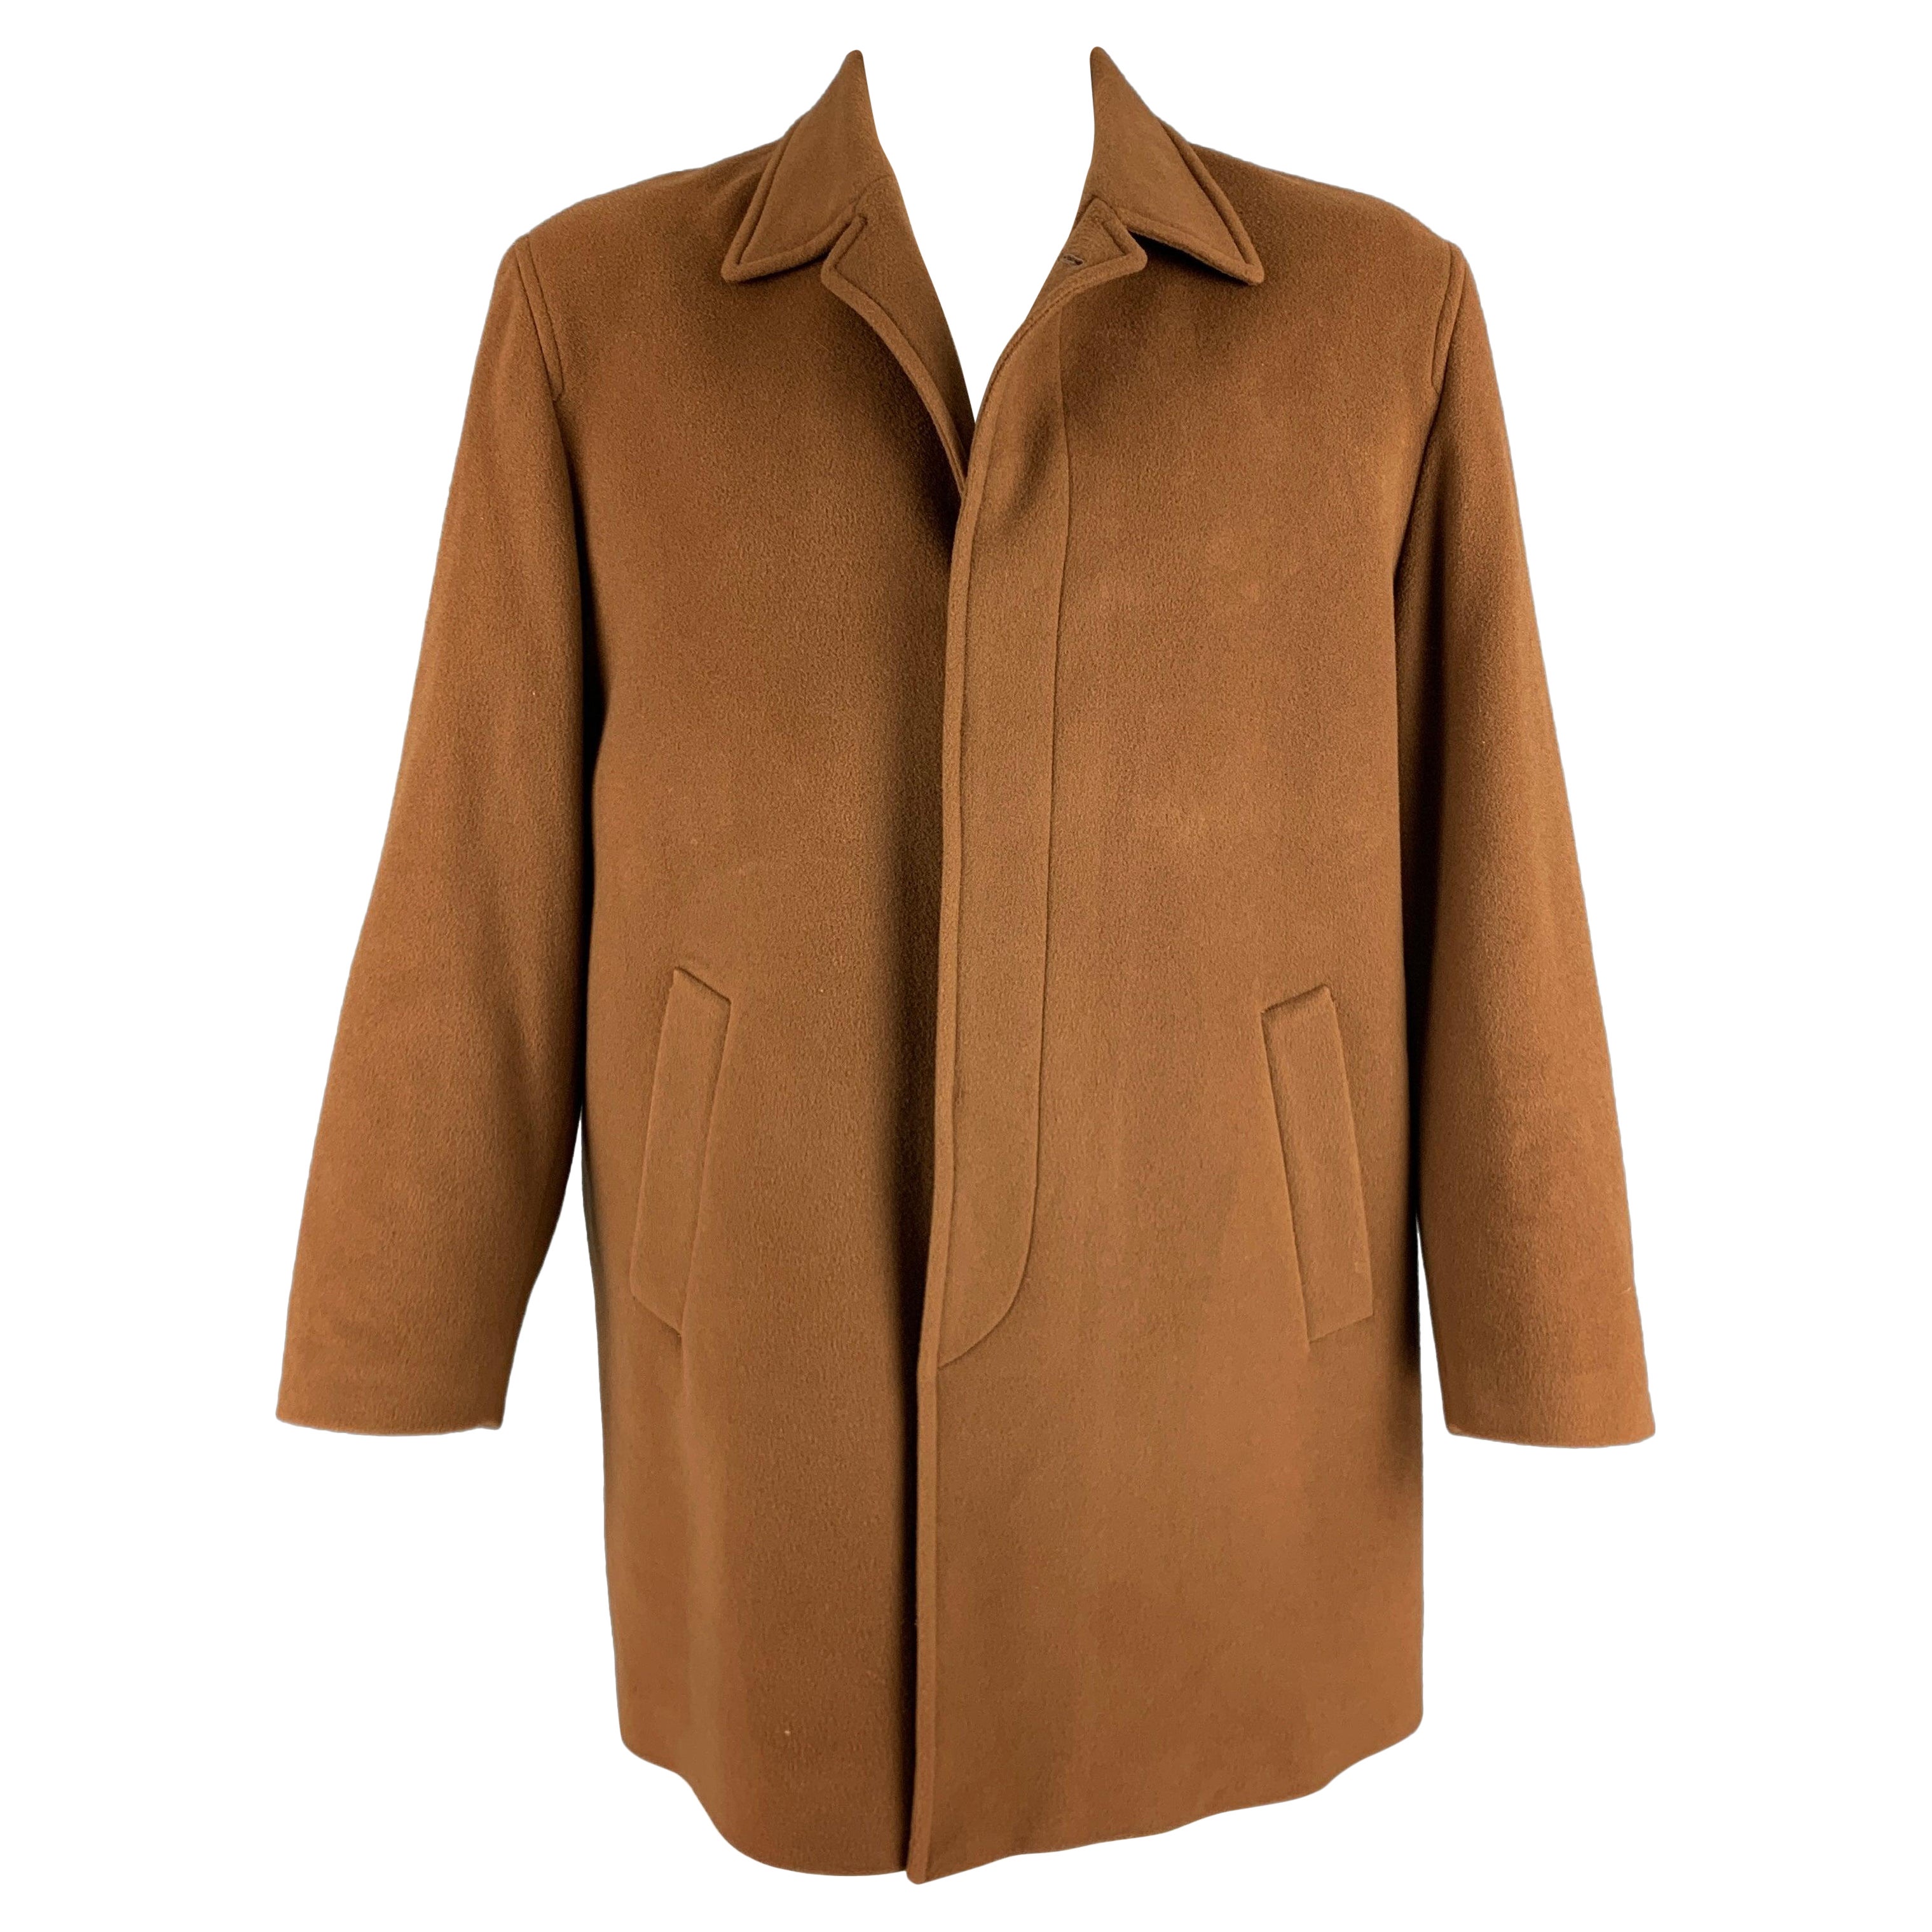 SAKS FIFTH AVENUE Size 48 Tan Wool Cashmere Coat For Sale